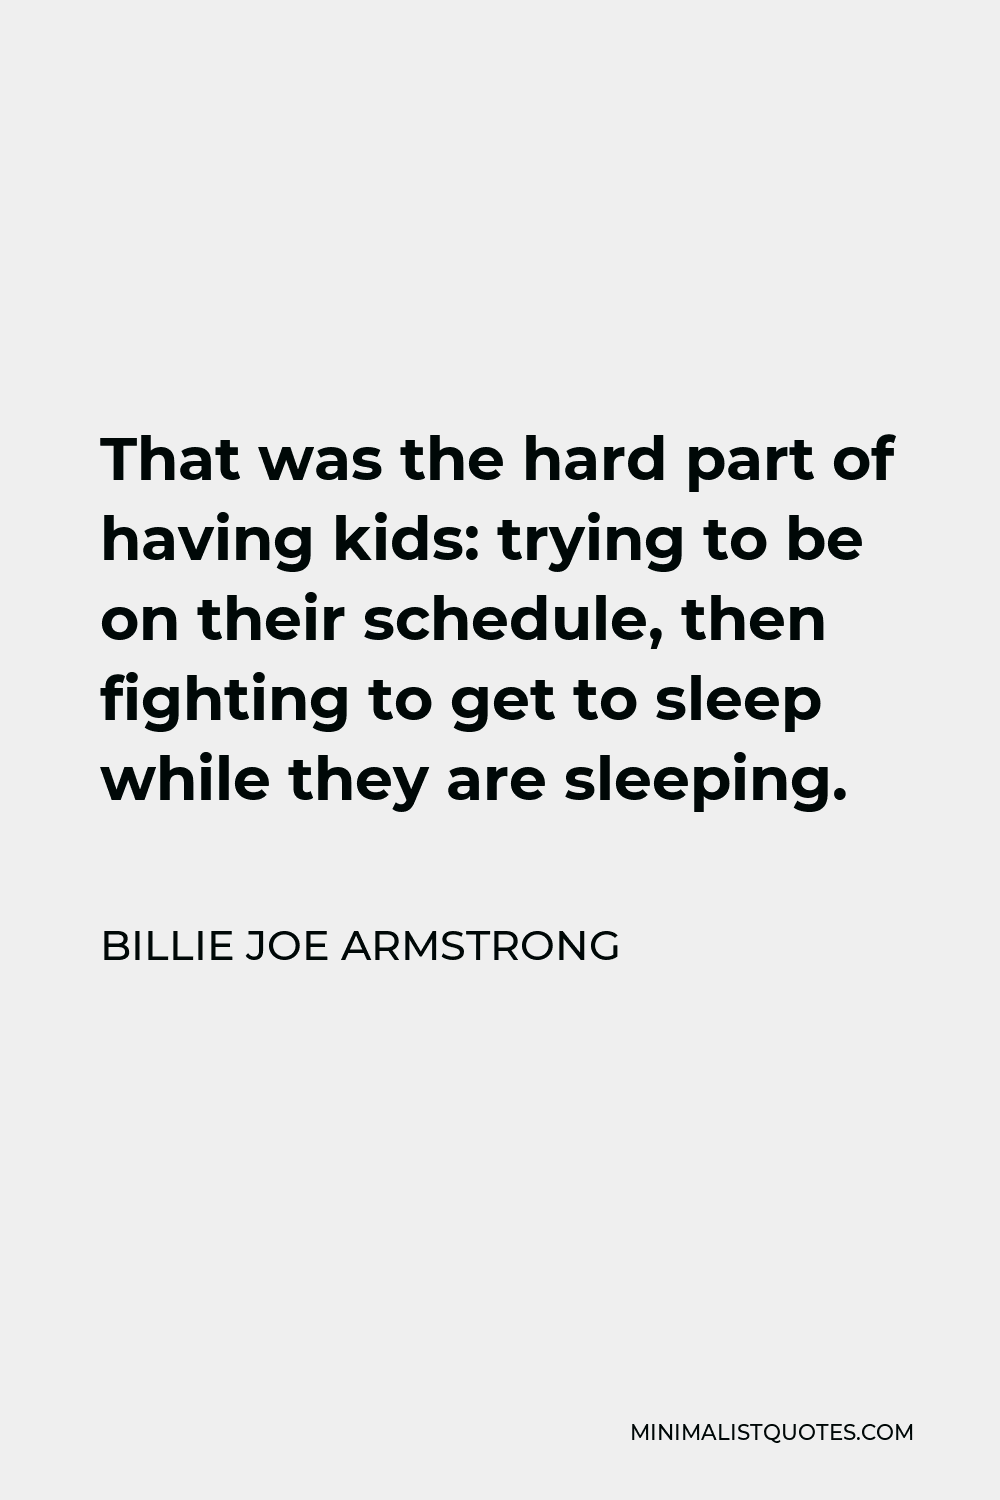 Billie Joe Armstrong Quote - That was the hard part of having kids: trying to be on their schedule, then fighting to get to sleep while they are sleeping.